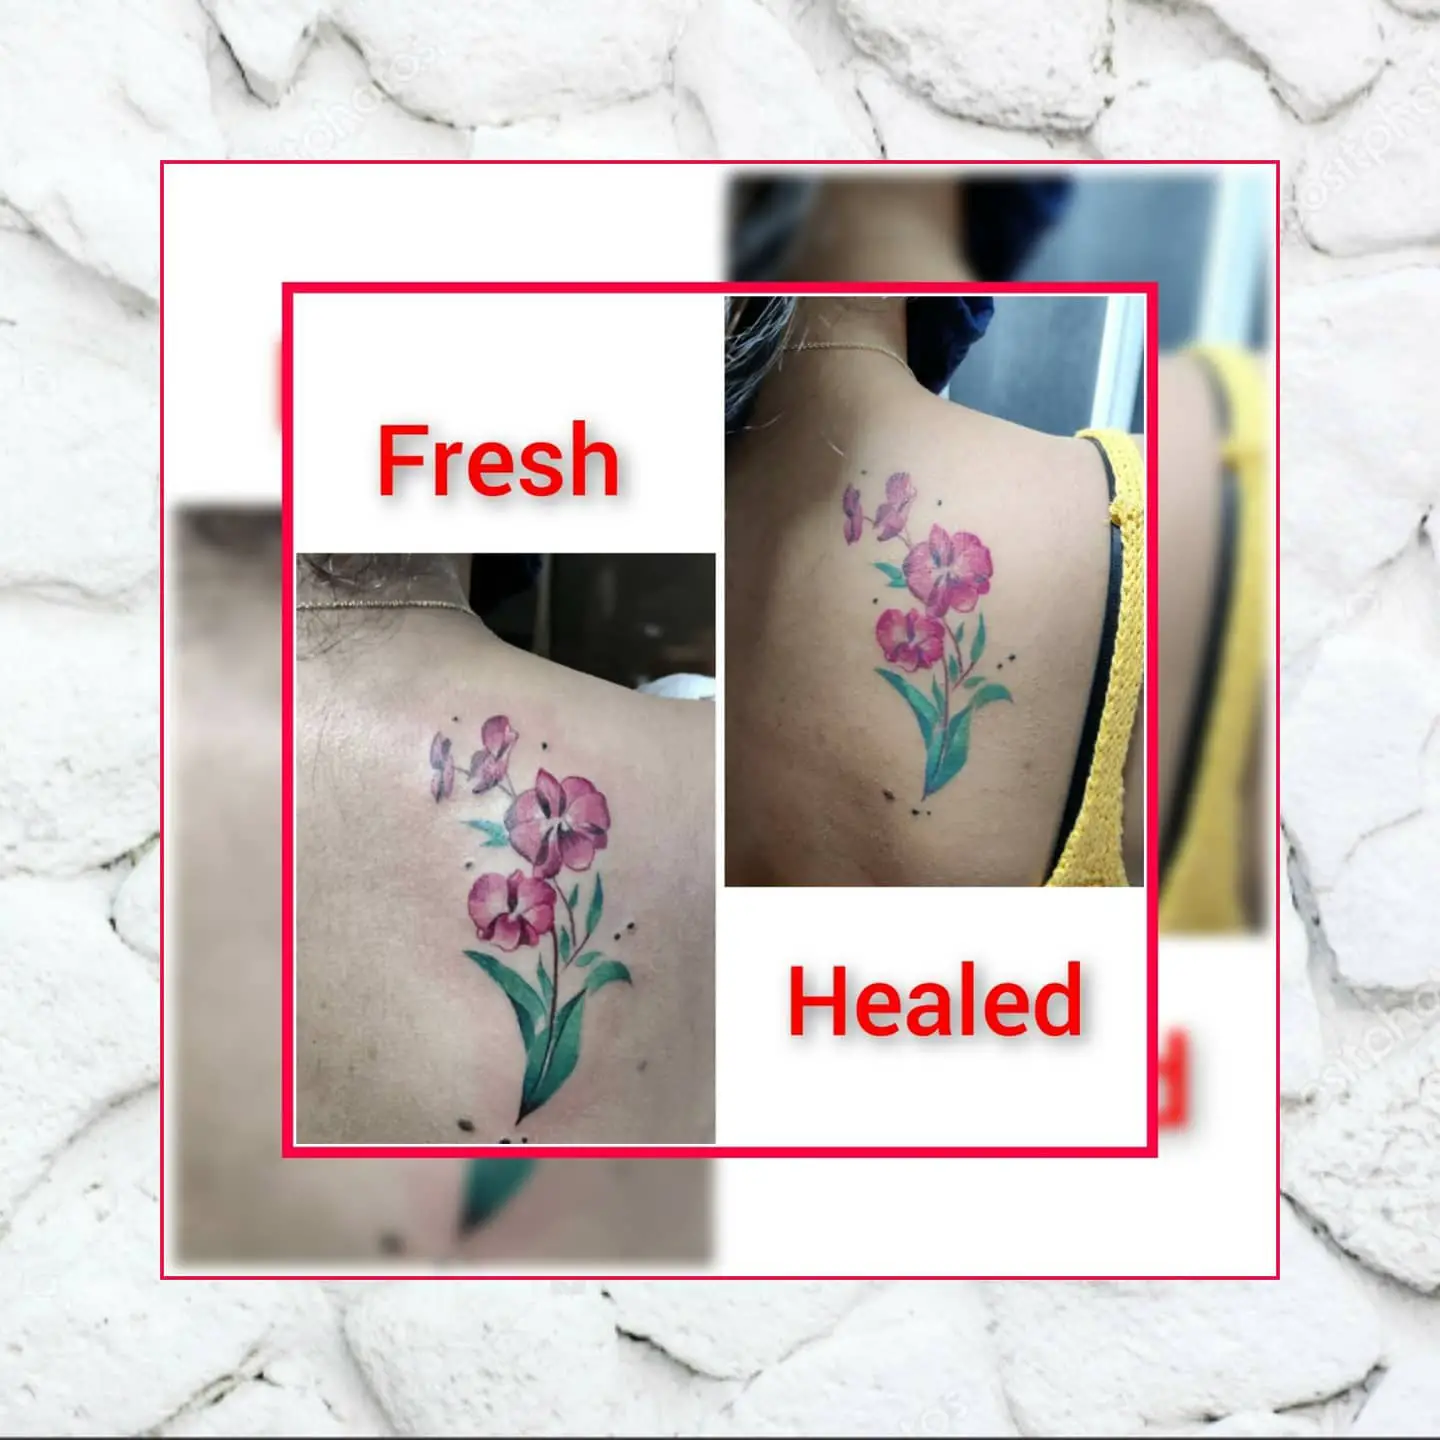 What Are The Three Stages Of The Recovery Process For A Tattoo? - Psycho Tats